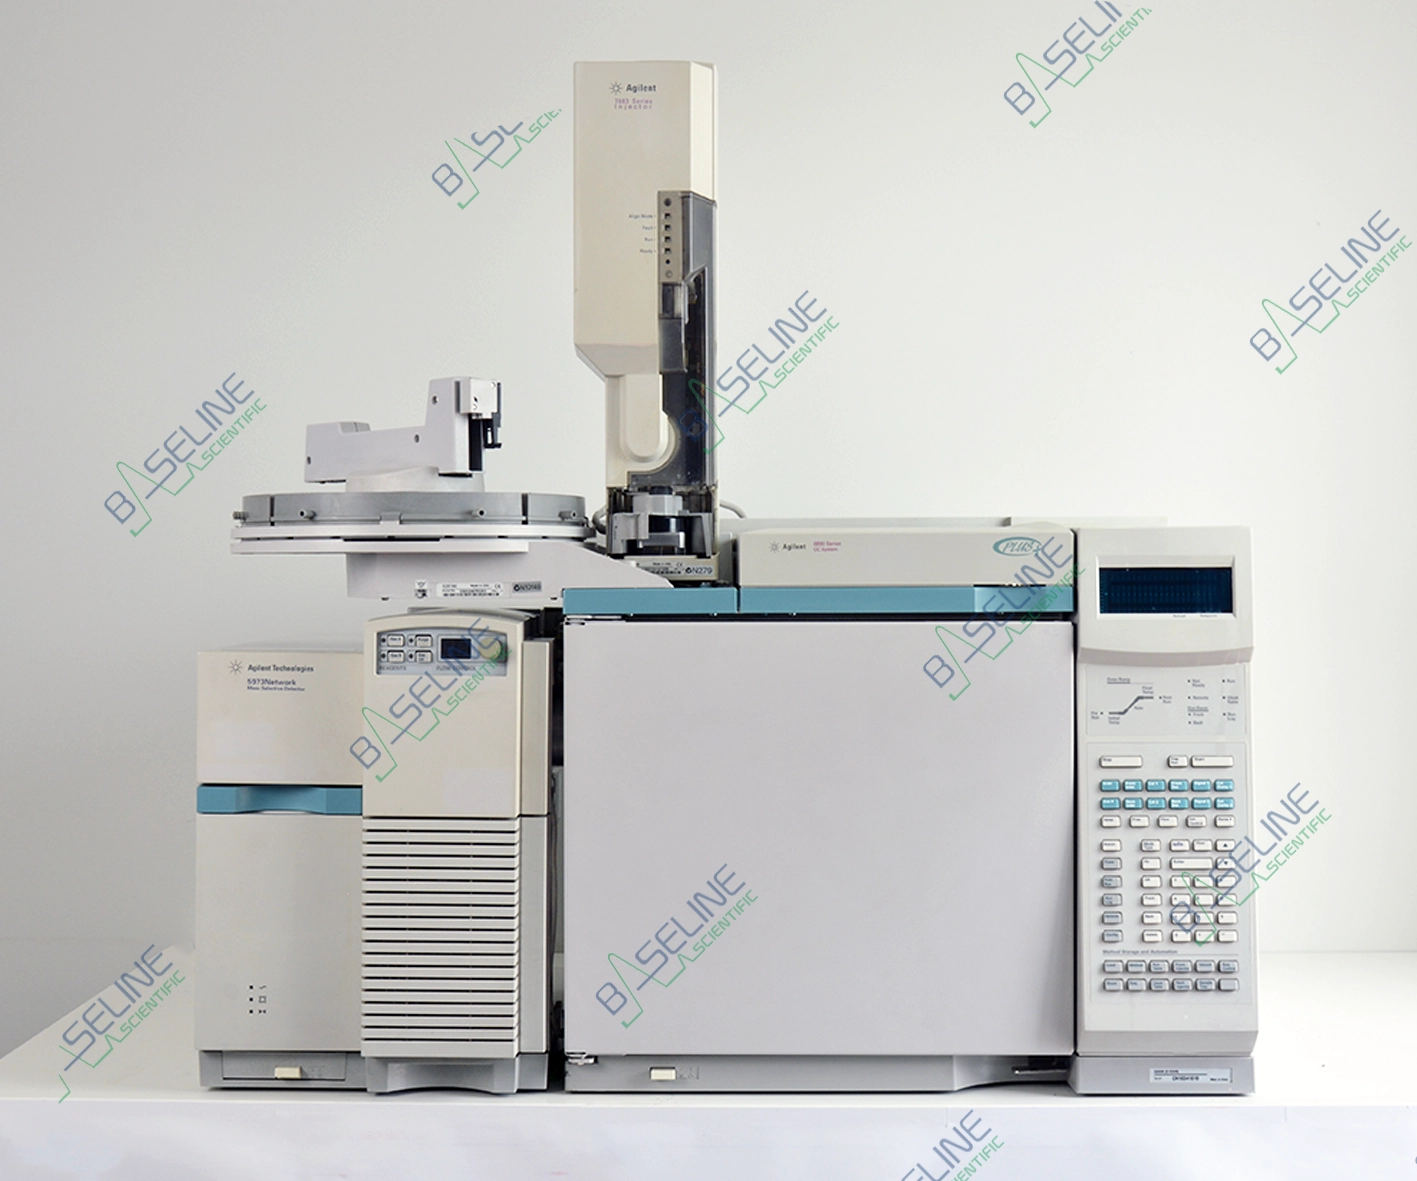 Refurbished Agilent 6890 GC with 5973A MSD Performance Turbo Pump and 7683 Autosampler